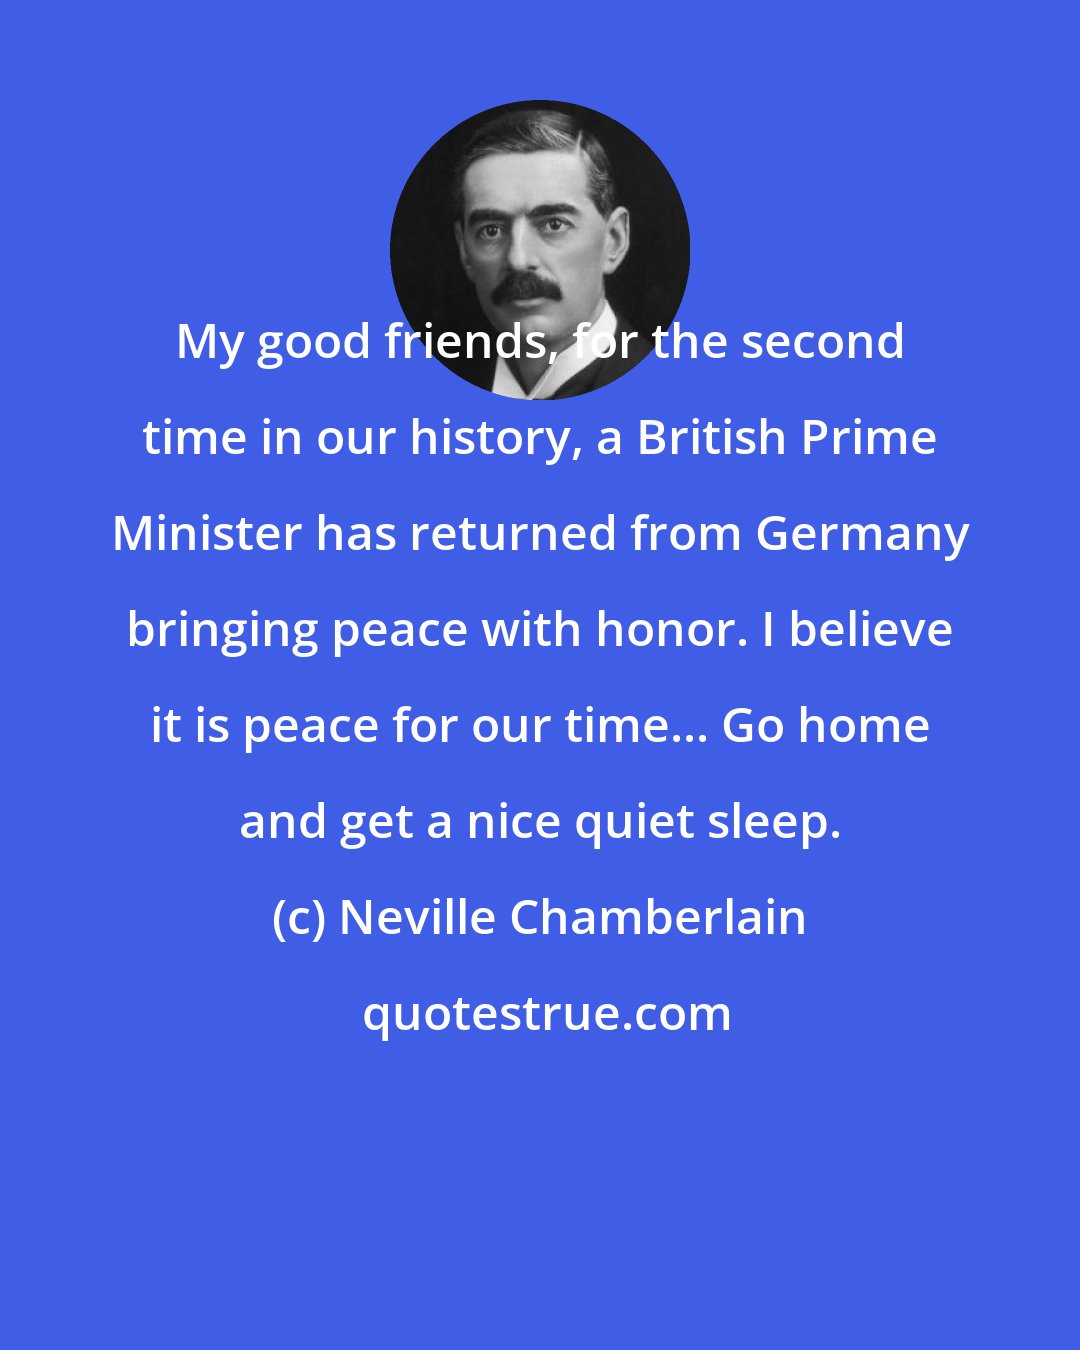 Neville Chamberlain: My good friends, for the second time in our history, a British Prime Minister has returned from Germany bringing peace with honor. I believe it is peace for our time... Go home and get a nice quiet sleep.